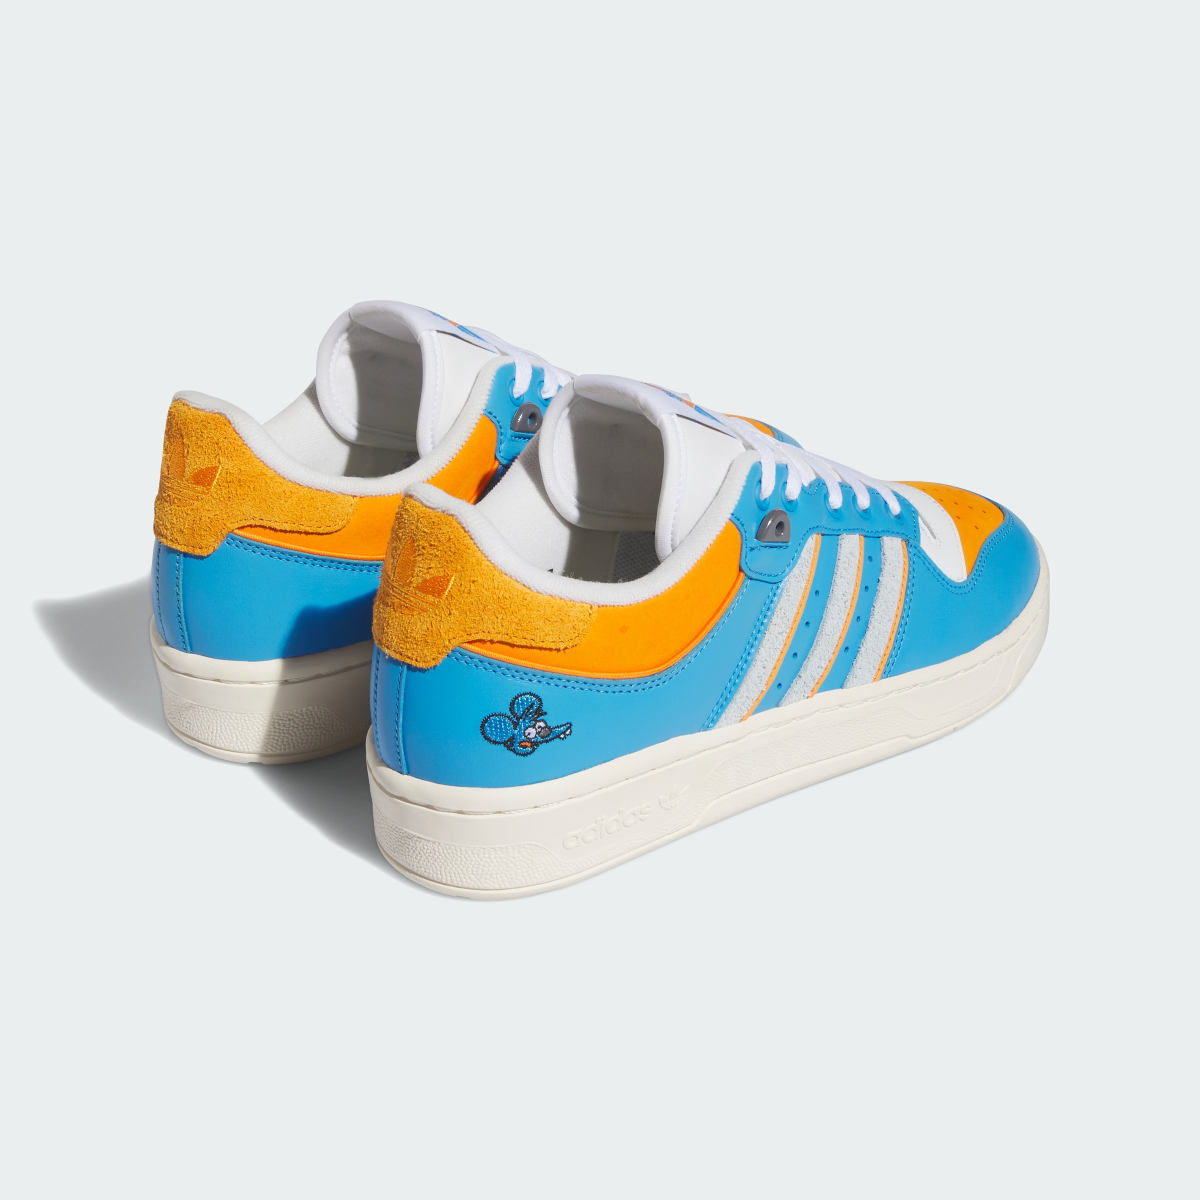 Adidas Sapatilhas adidas Rivalry Low Itchy. 8